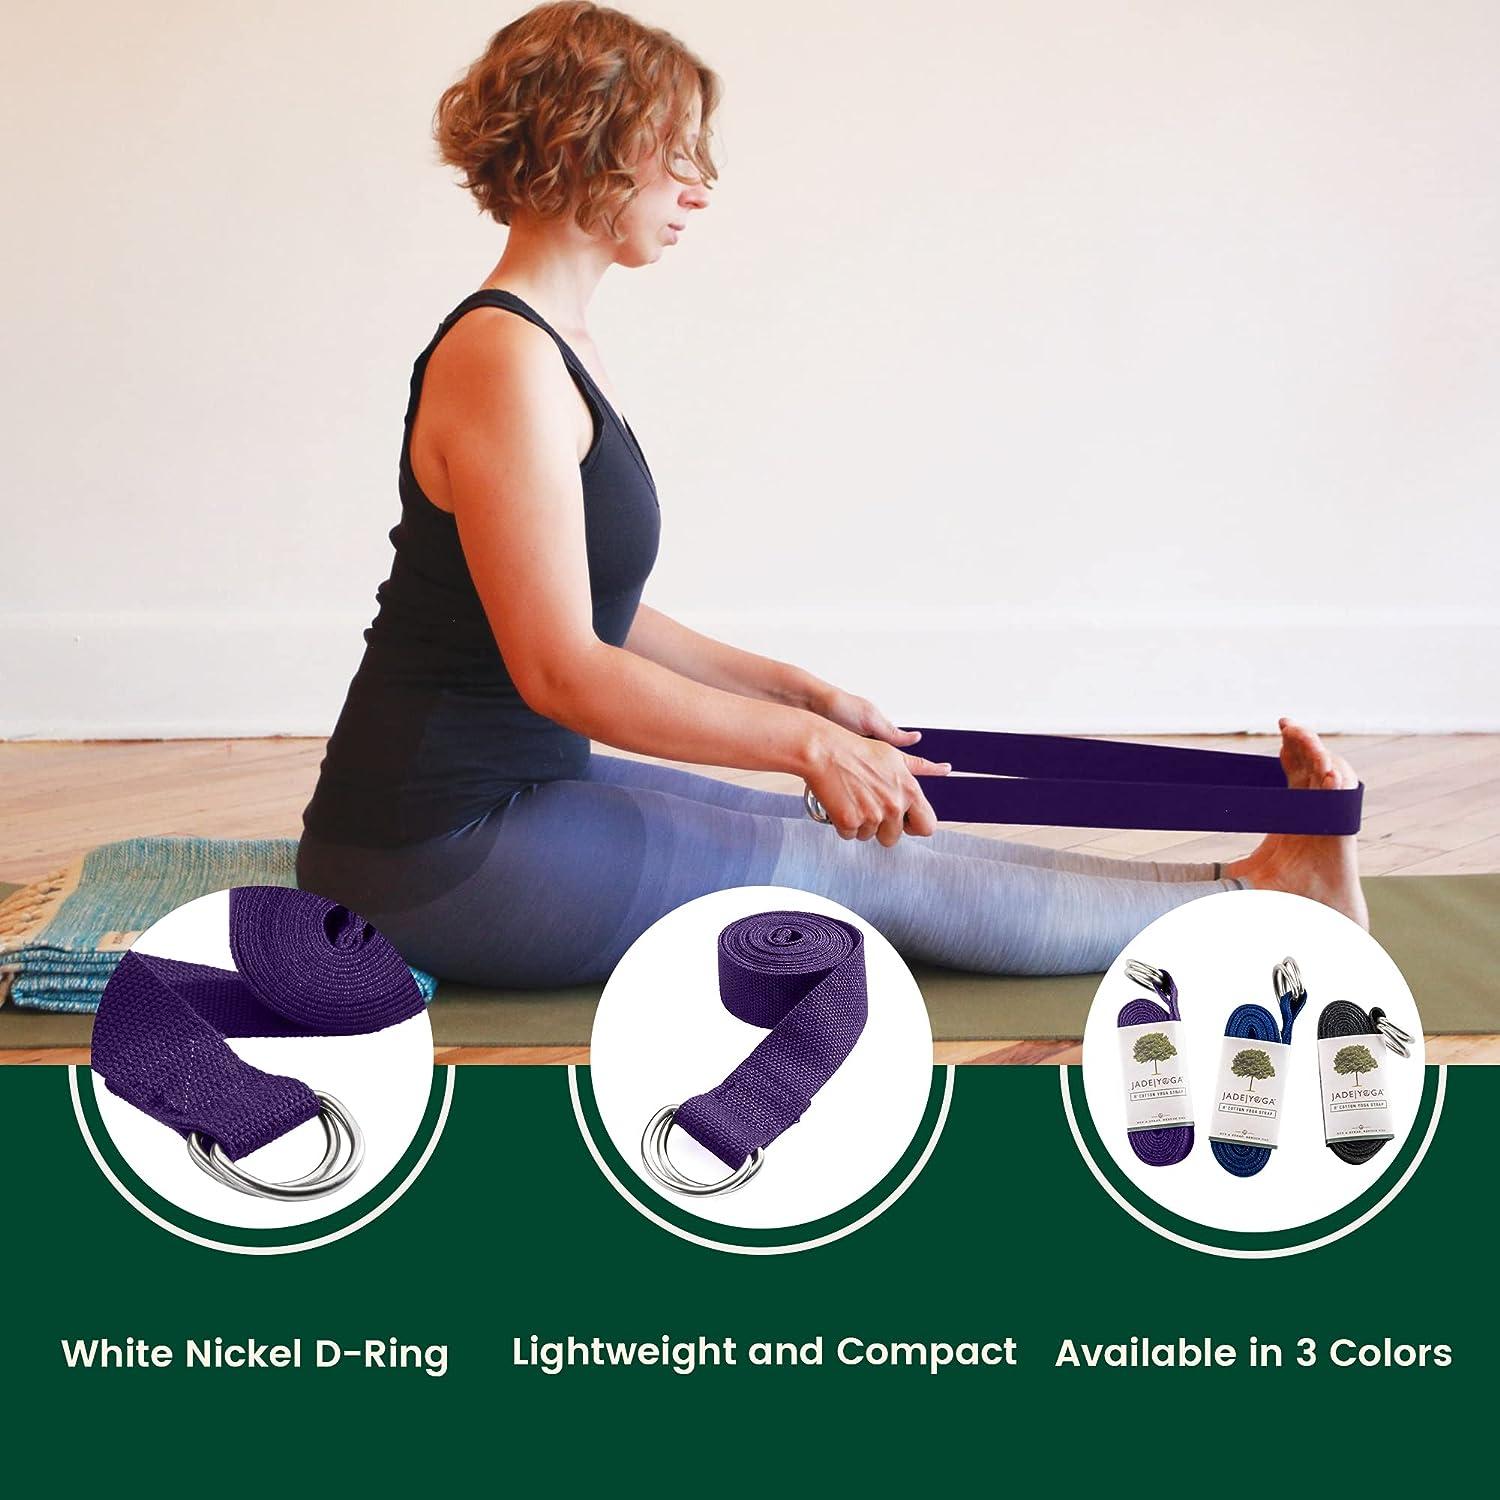 JadeYoga Strap - 8 Foot Long Adjustable Strap for Yoga, Adjustable D-Ring  Buckle for Beginners and Experienced Yogis, Yoga Accessories for Men and  Women, Black, Blue & Purple